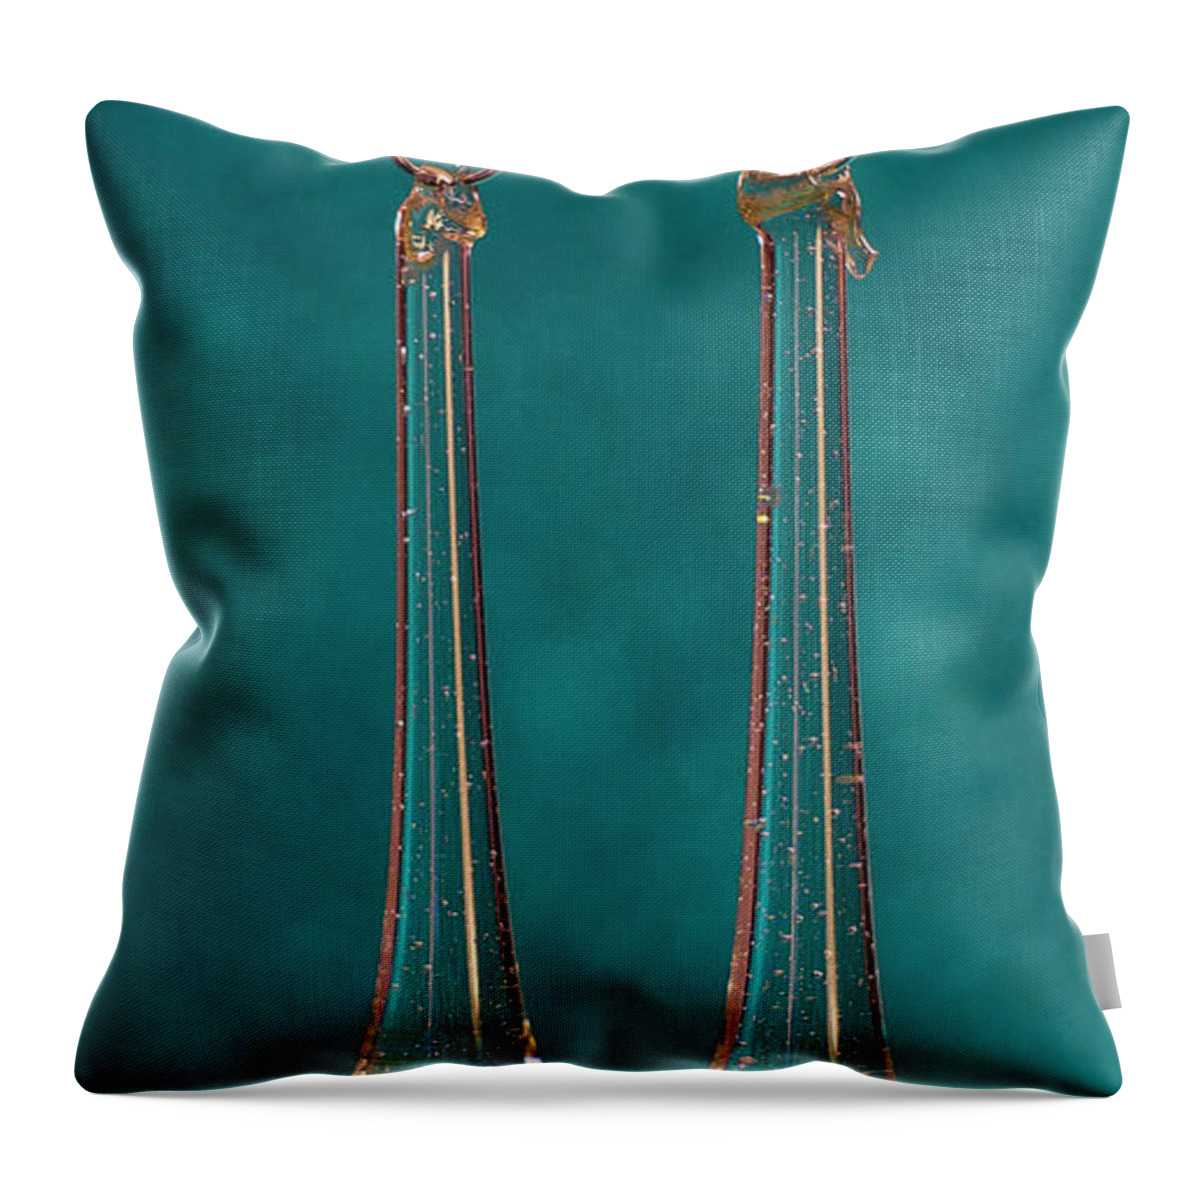 Fashion Throw Pillow featuring the photograph Rock crystal teardrop earrings from antique lamps glittering by Pablo Avanzini